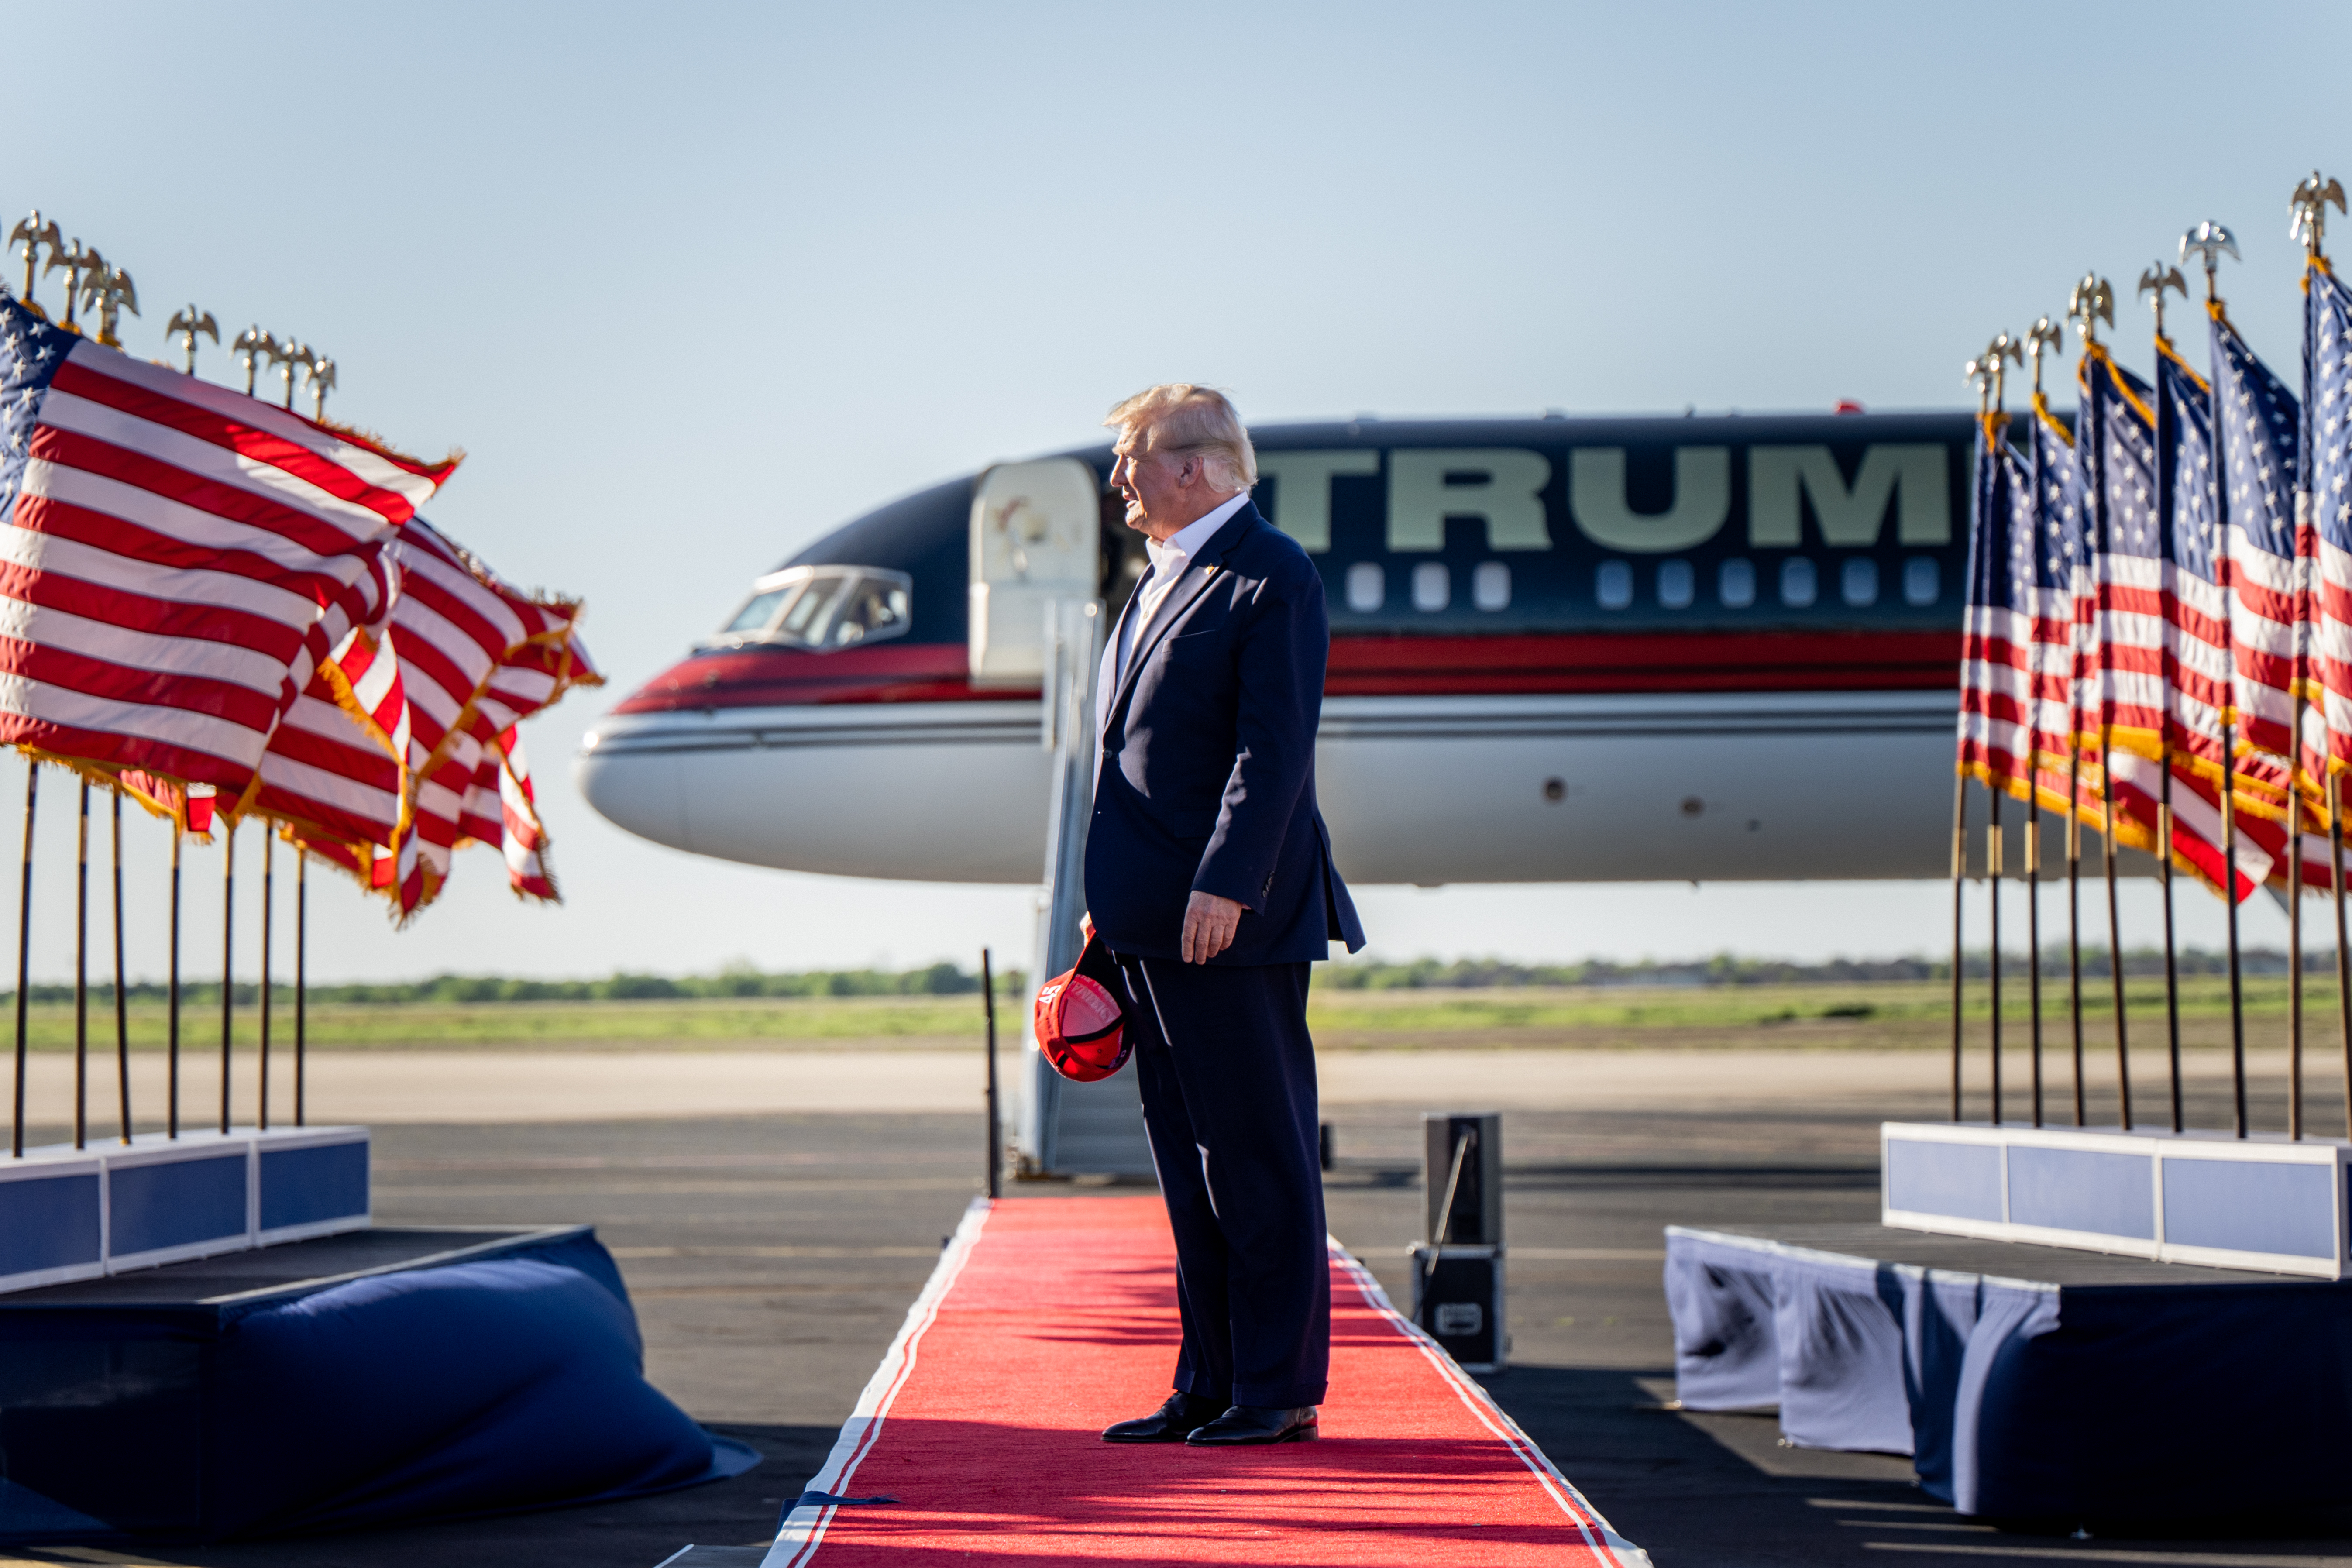 Trump tieless in a navy suit and white shirt, is seen in profile, standing between rows of flapping US flags, his plane, reading TRUMP behind him. He’s looking down, his MAGA hat in his hand.